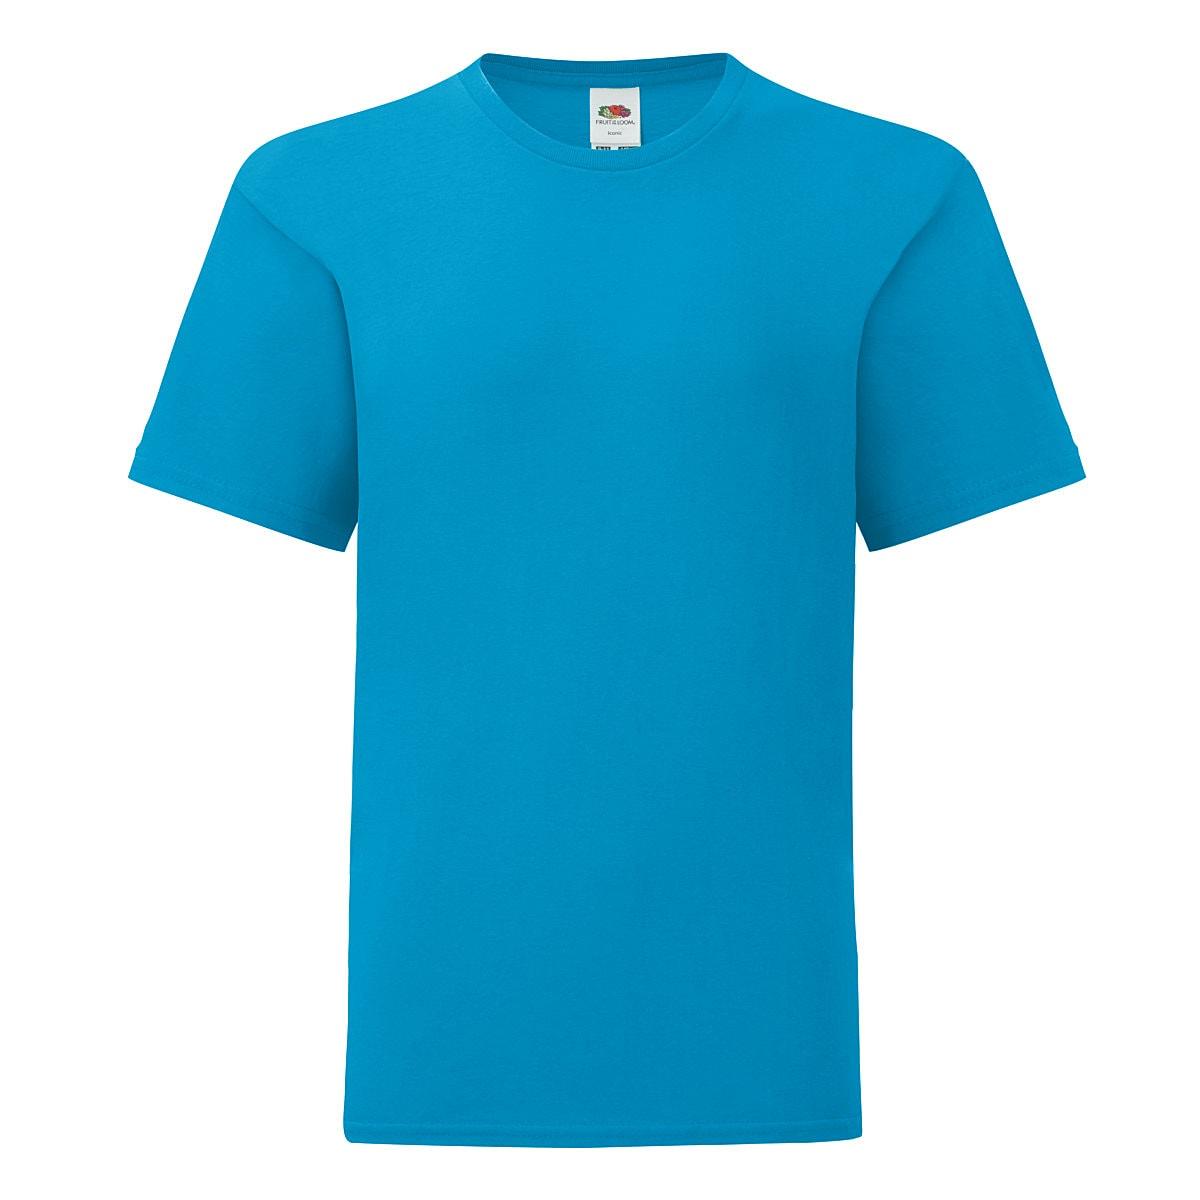 Fruit Of The Loom Kids Iconic T-Shirt in Azure Blue (Product Code: 61023)